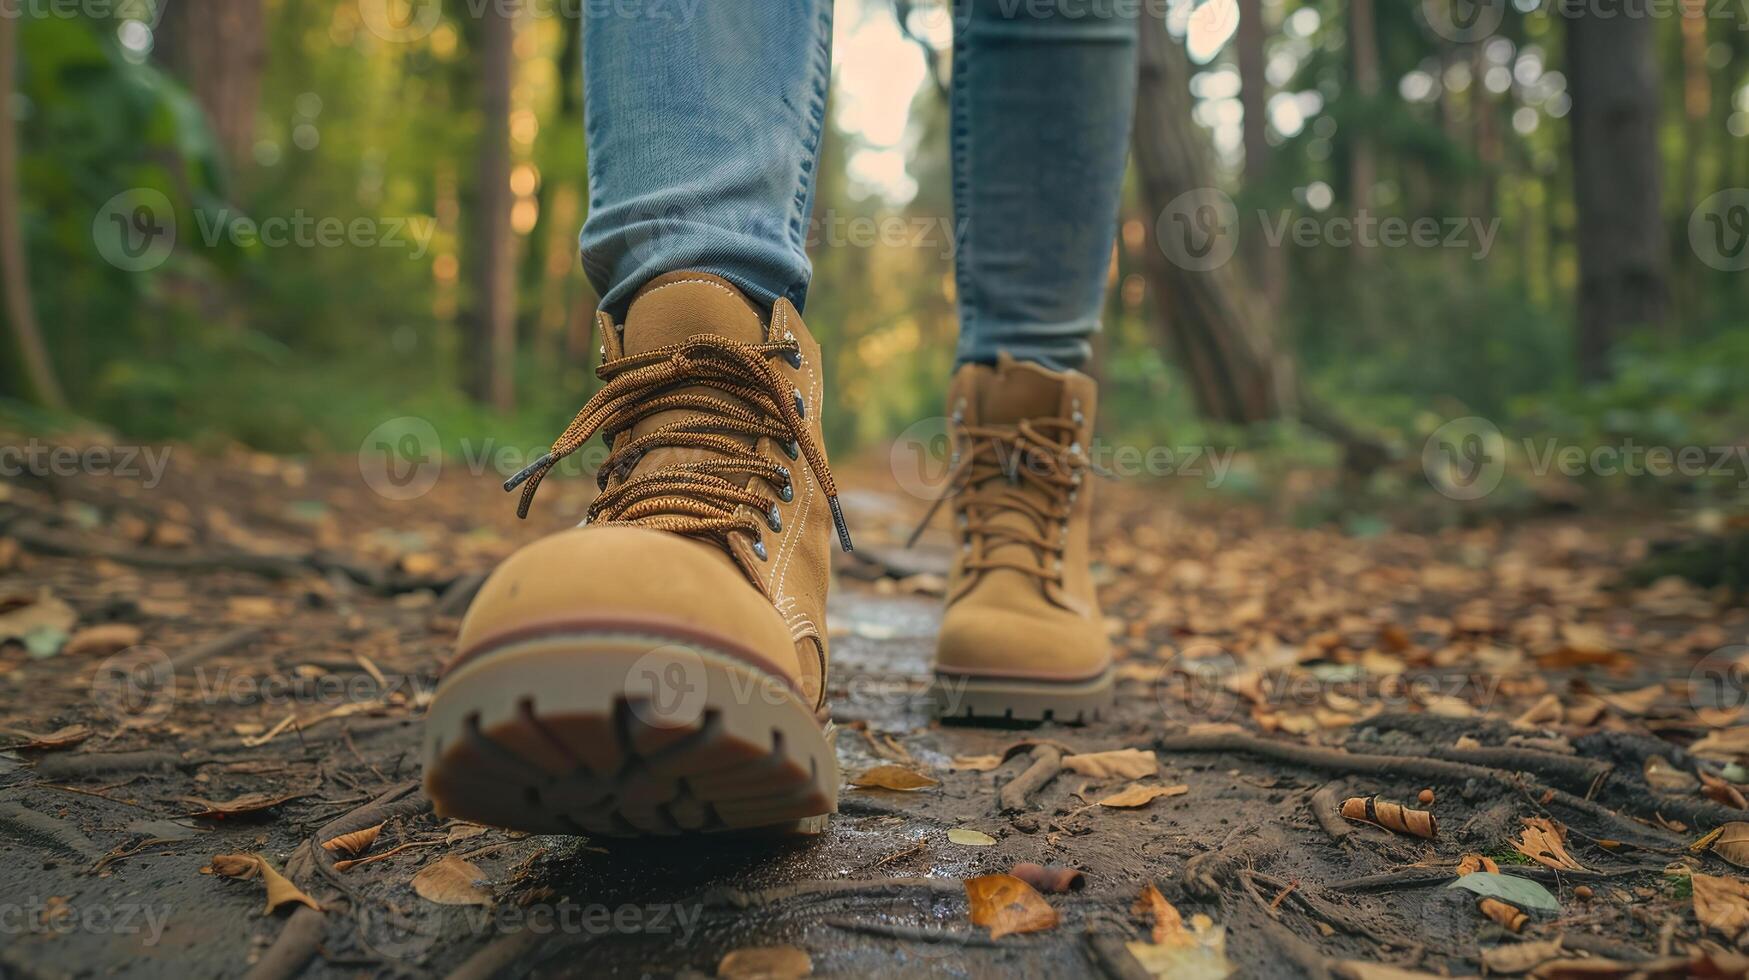 Active Lifestyle Scene Close Up of Walking Boots on a Nature Trail photo